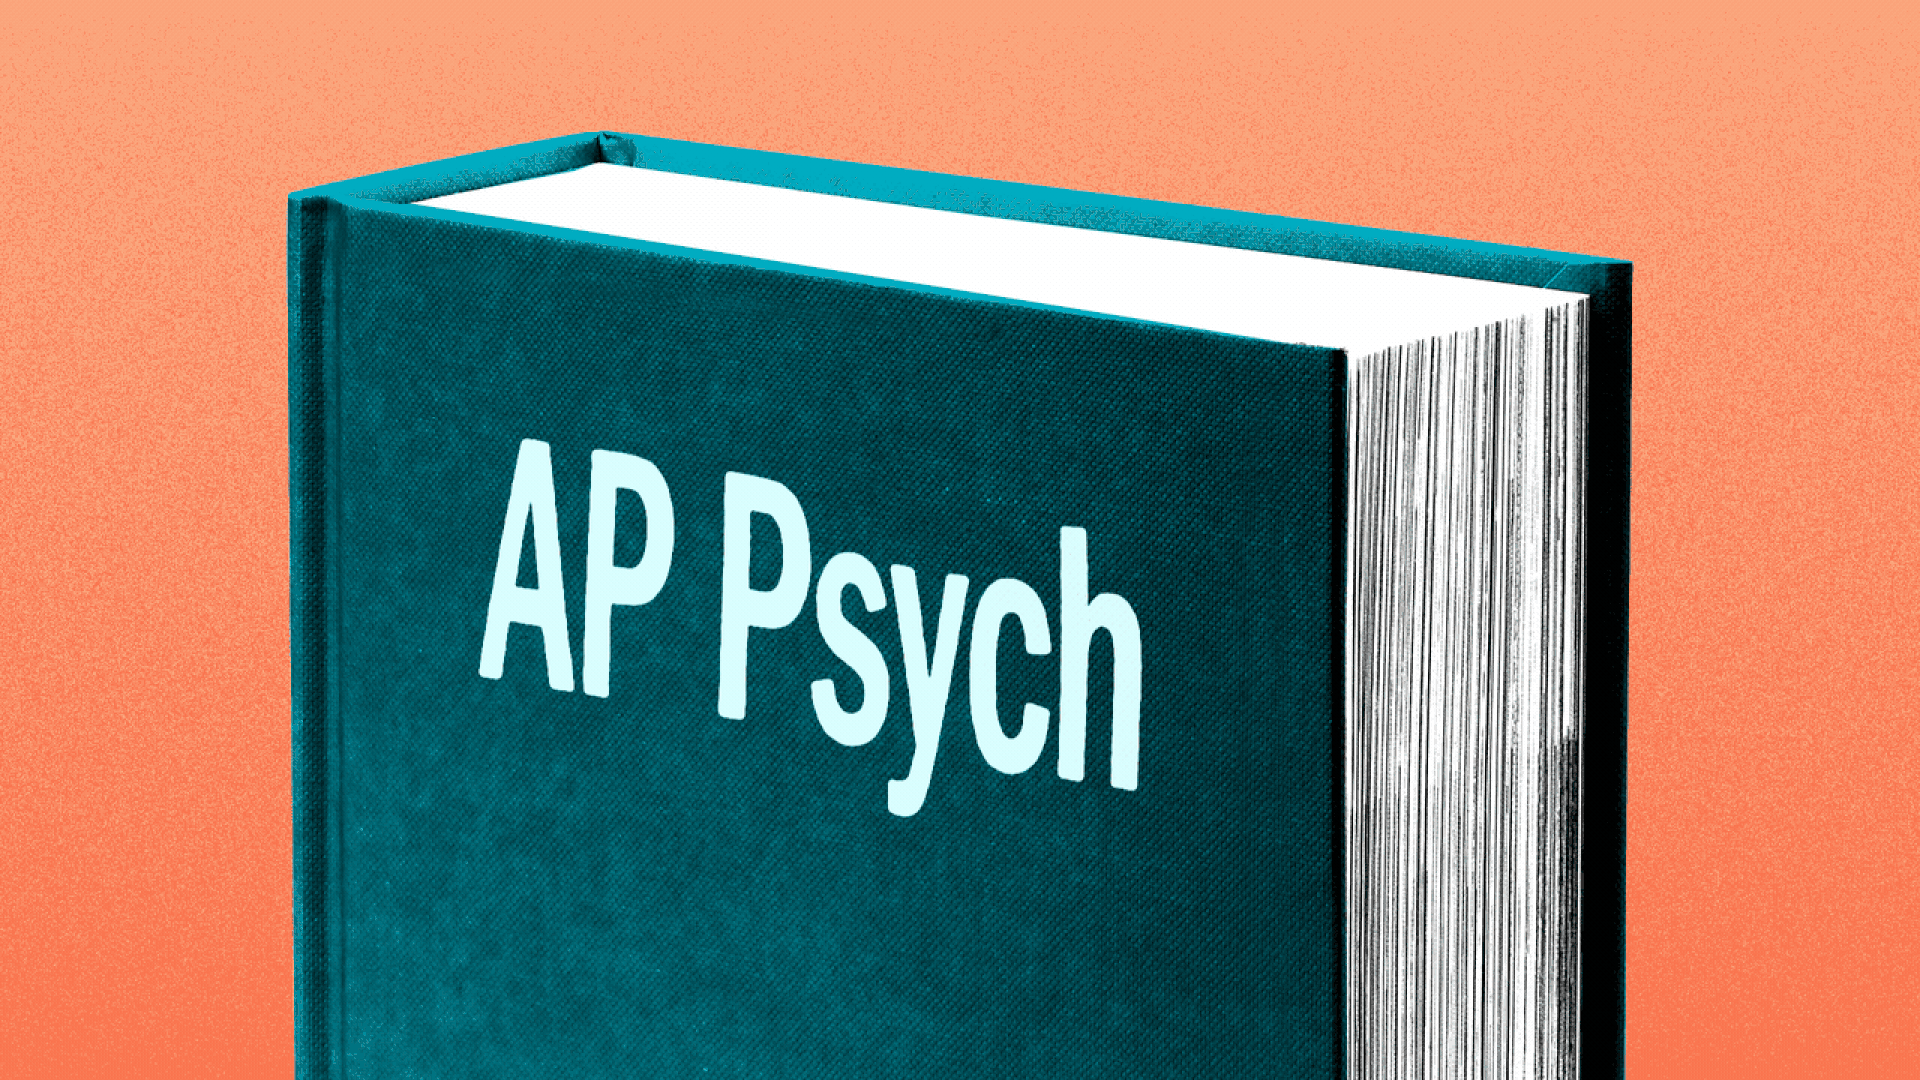 Animated illustration of an AP Psychology textbook with the words AP Psych turning into a shrug emoji.